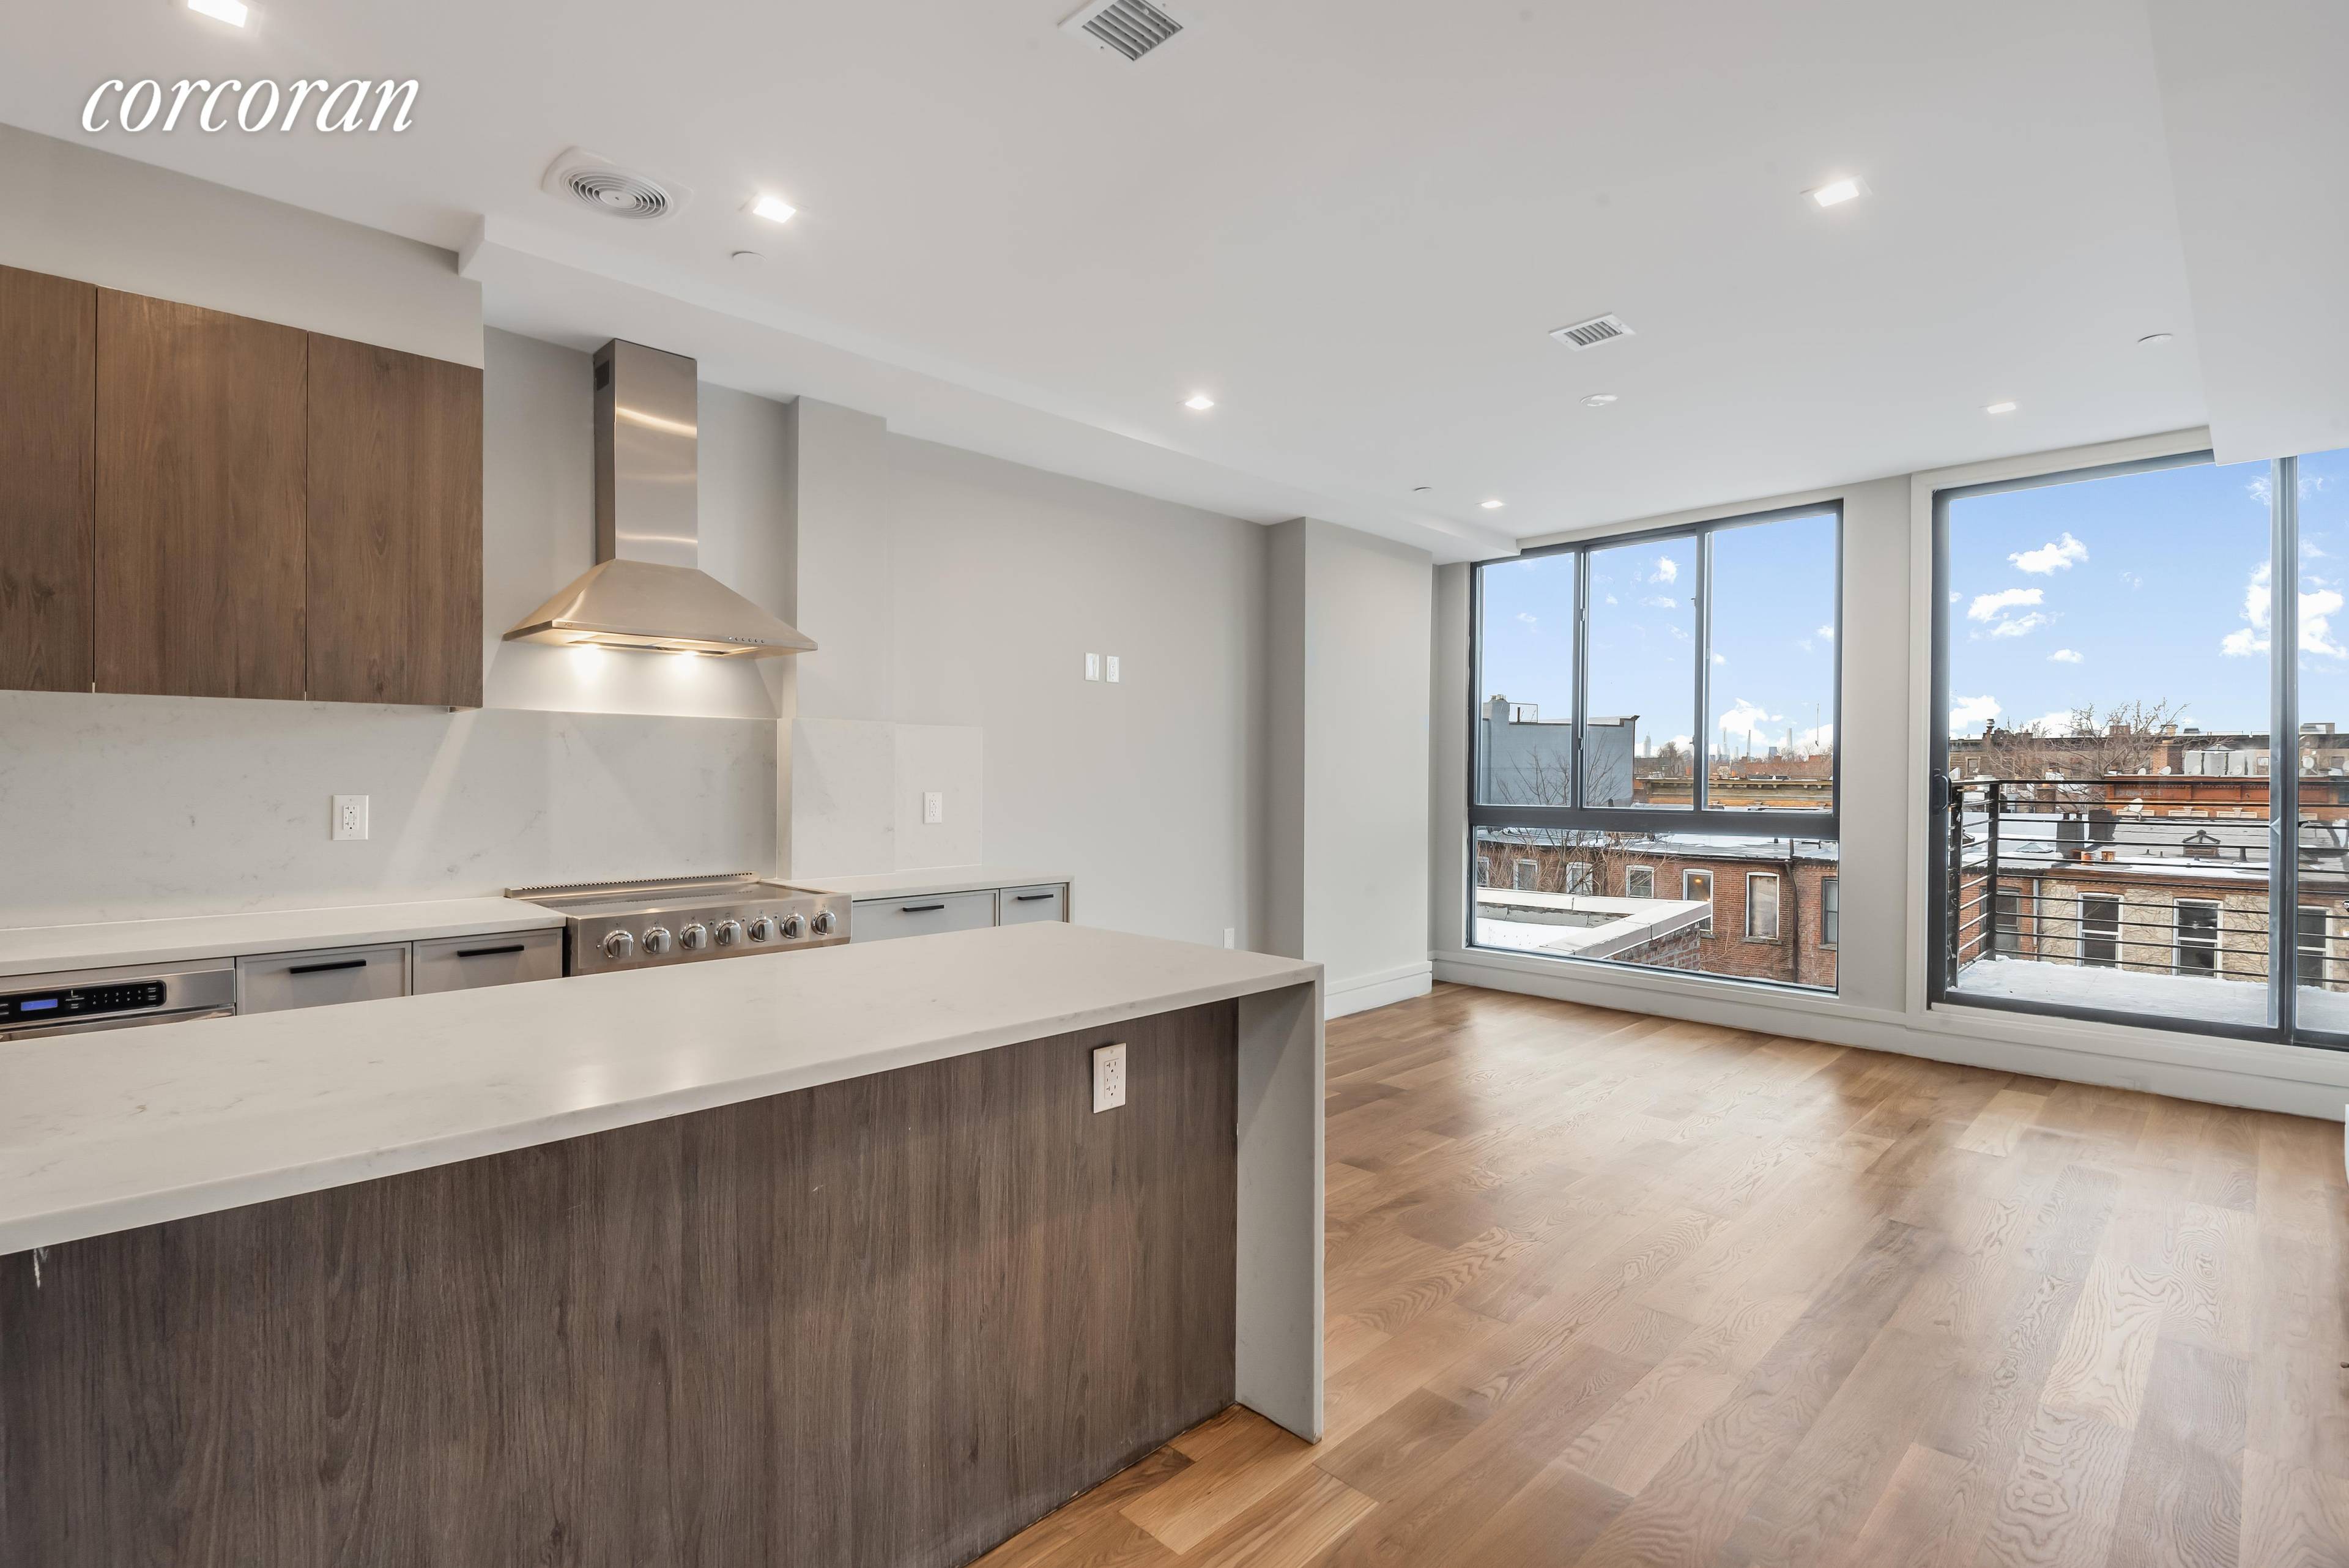 Unit 4 at 633 Macon Street is a 1016 square foot home with two bedrooms, two full bathrooms and two terraces, one off of the living room and another one ...